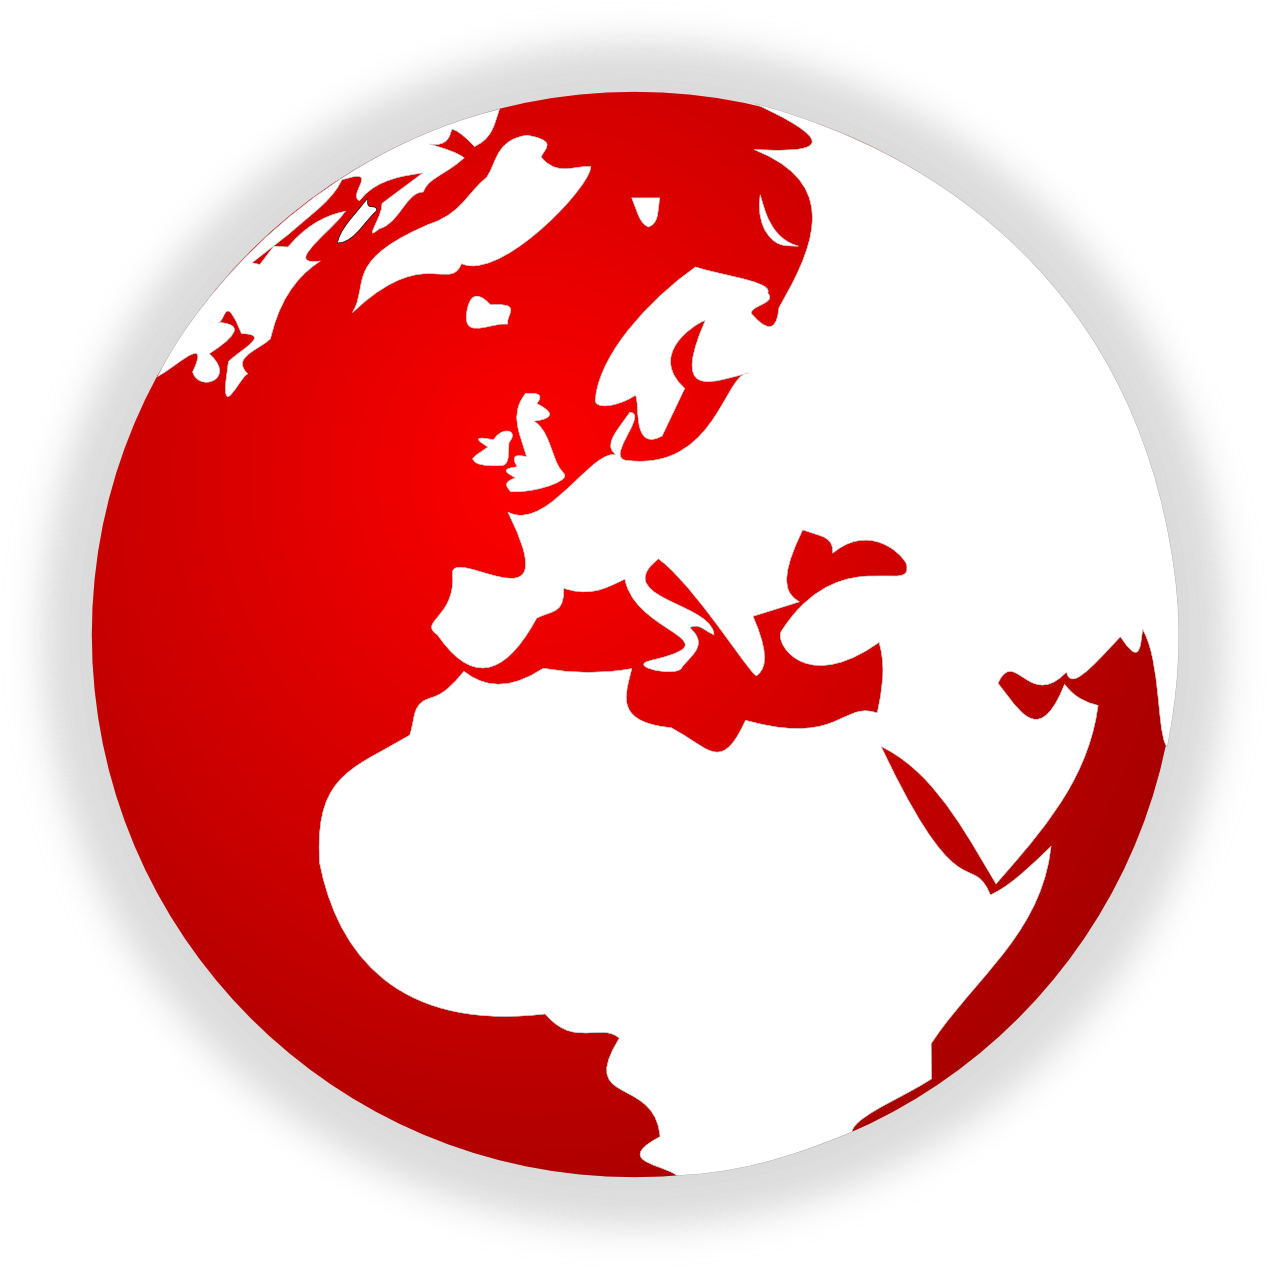 Red World Free Images At Clker Com Vector Clip Art - 24 News Channel Pakistan (1269x1269)